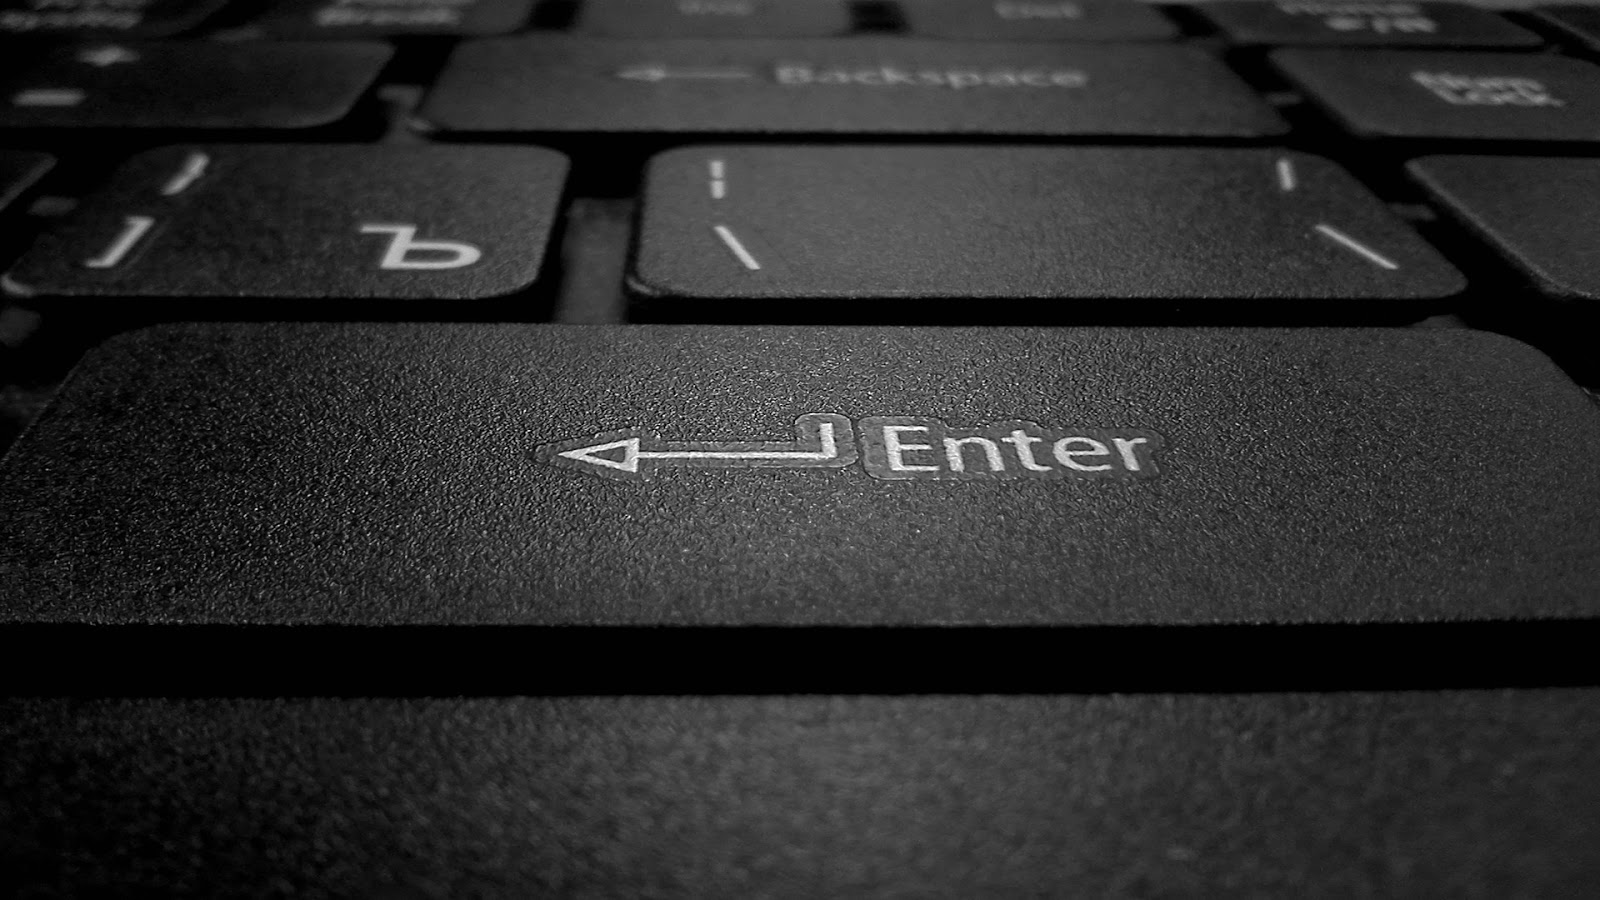 Cool Enter Keyboard Wallpaper Image With